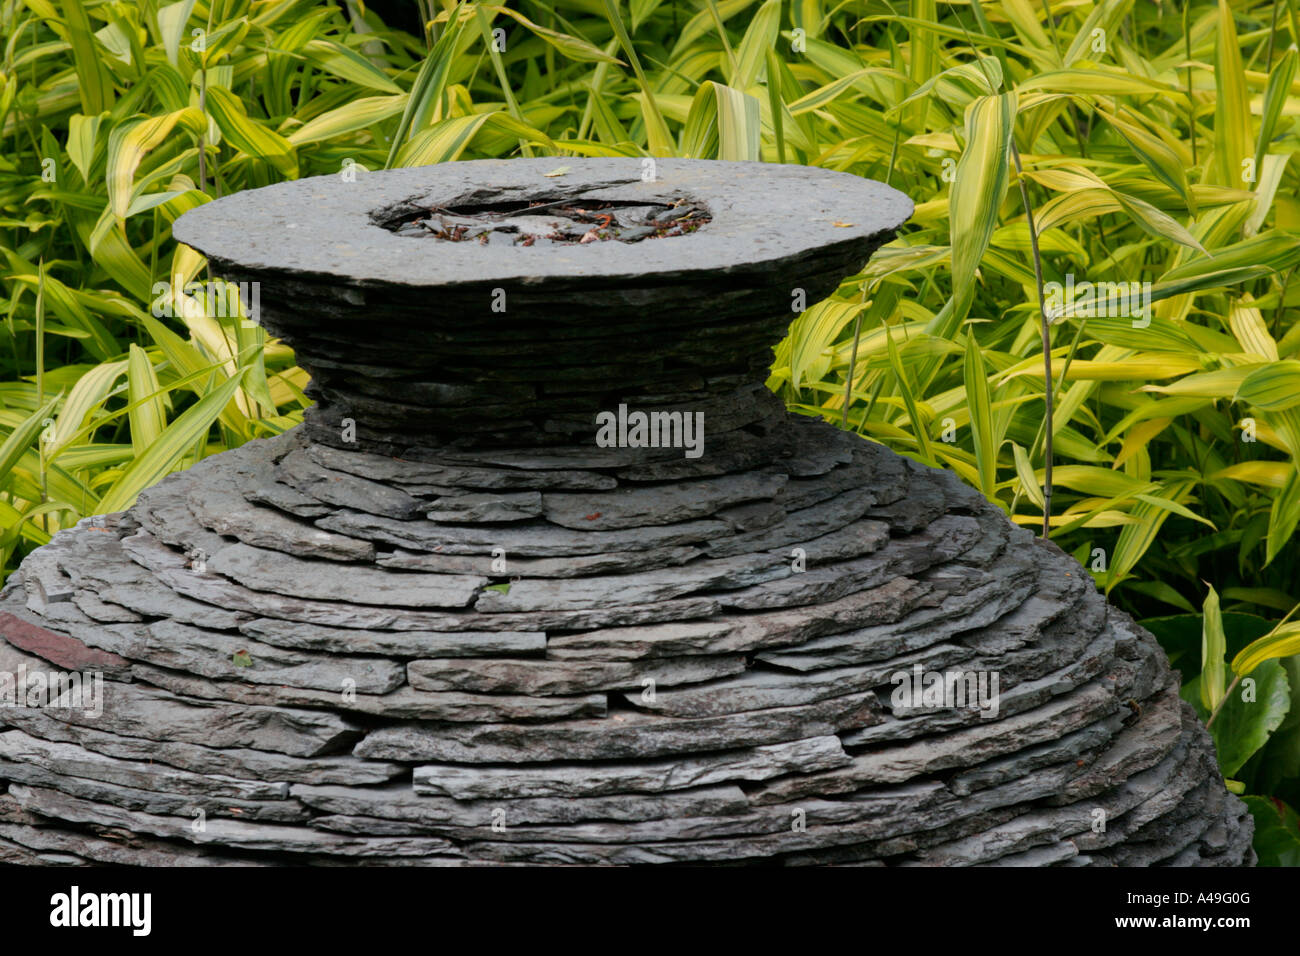 Stone slate garden ornament in front of bamboo Stock Photo